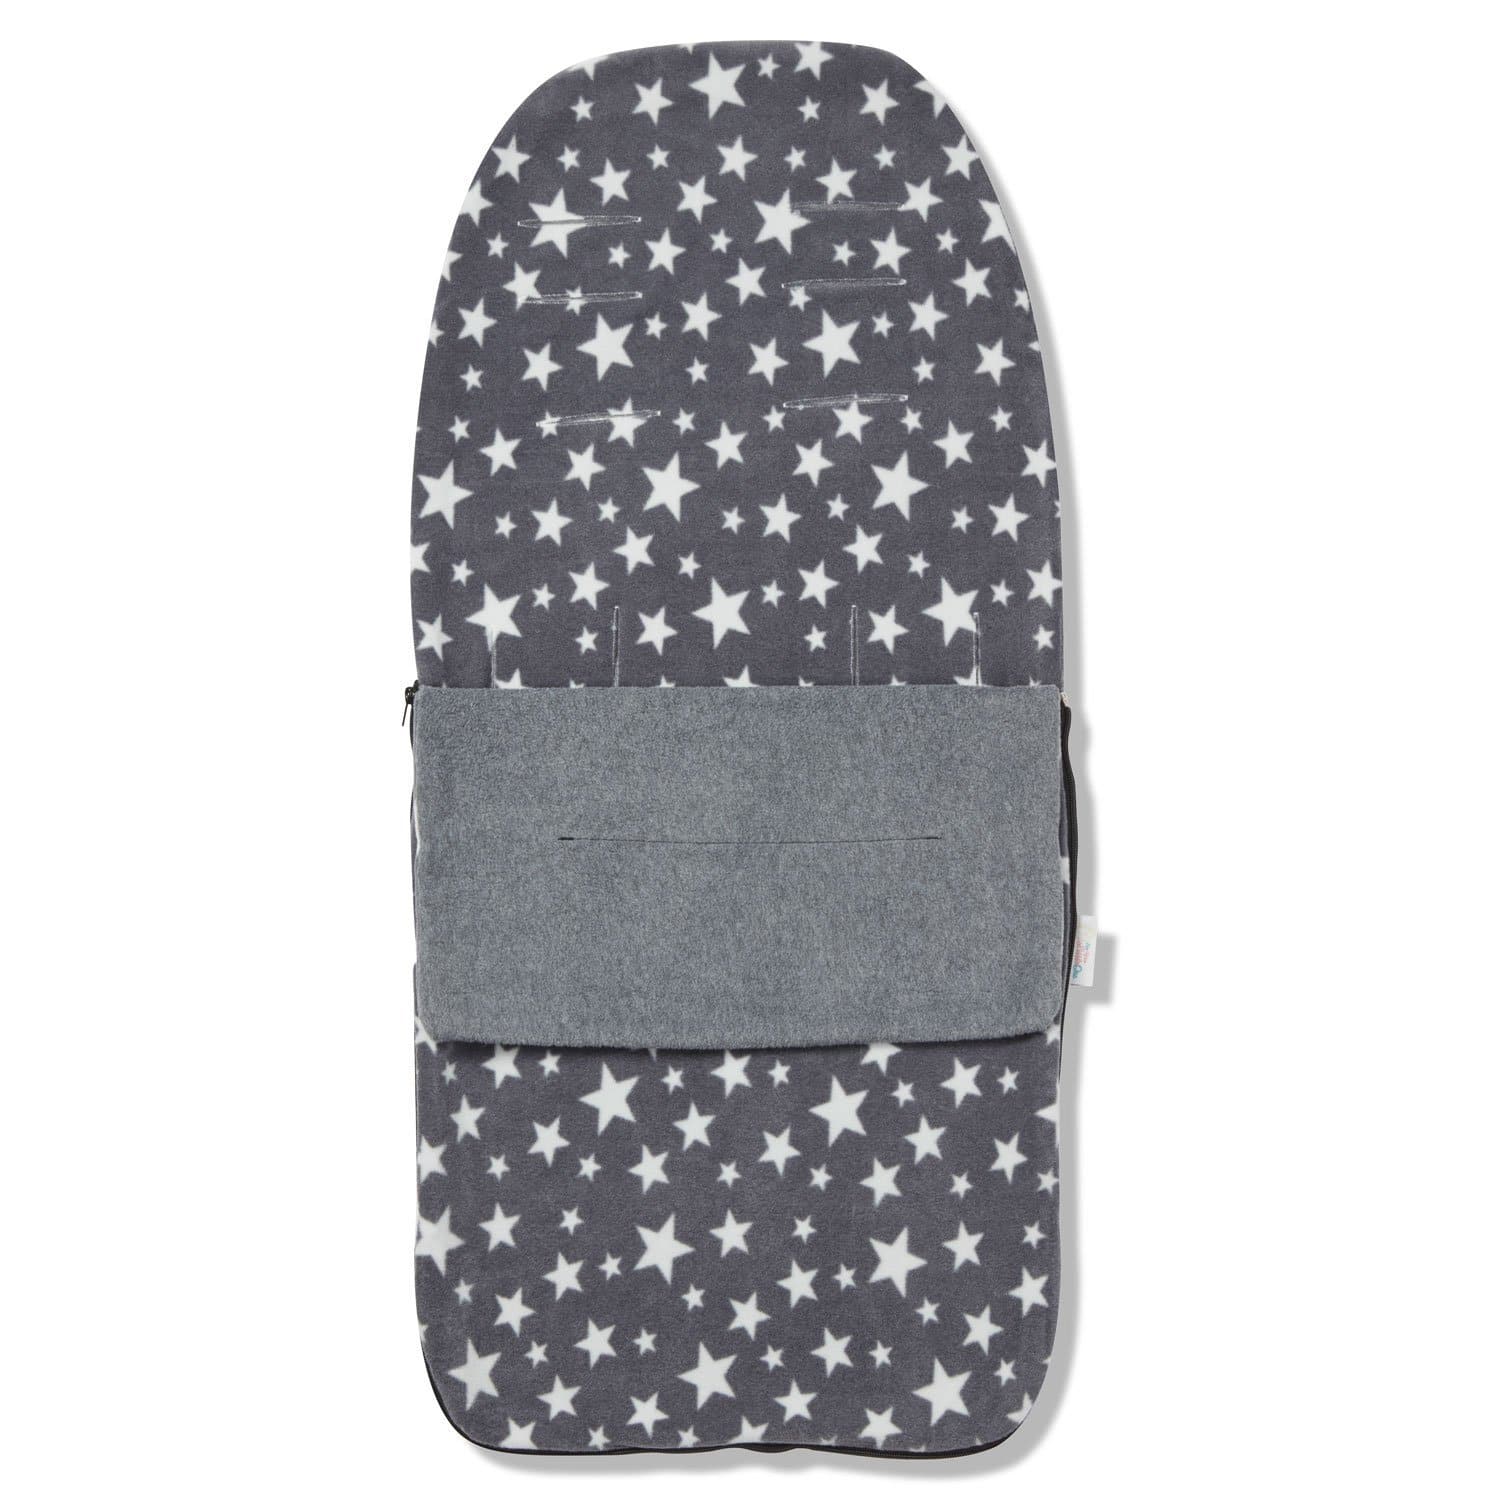 Snuggle Summer Footmuff Compatible with Hauck - For Your Little One